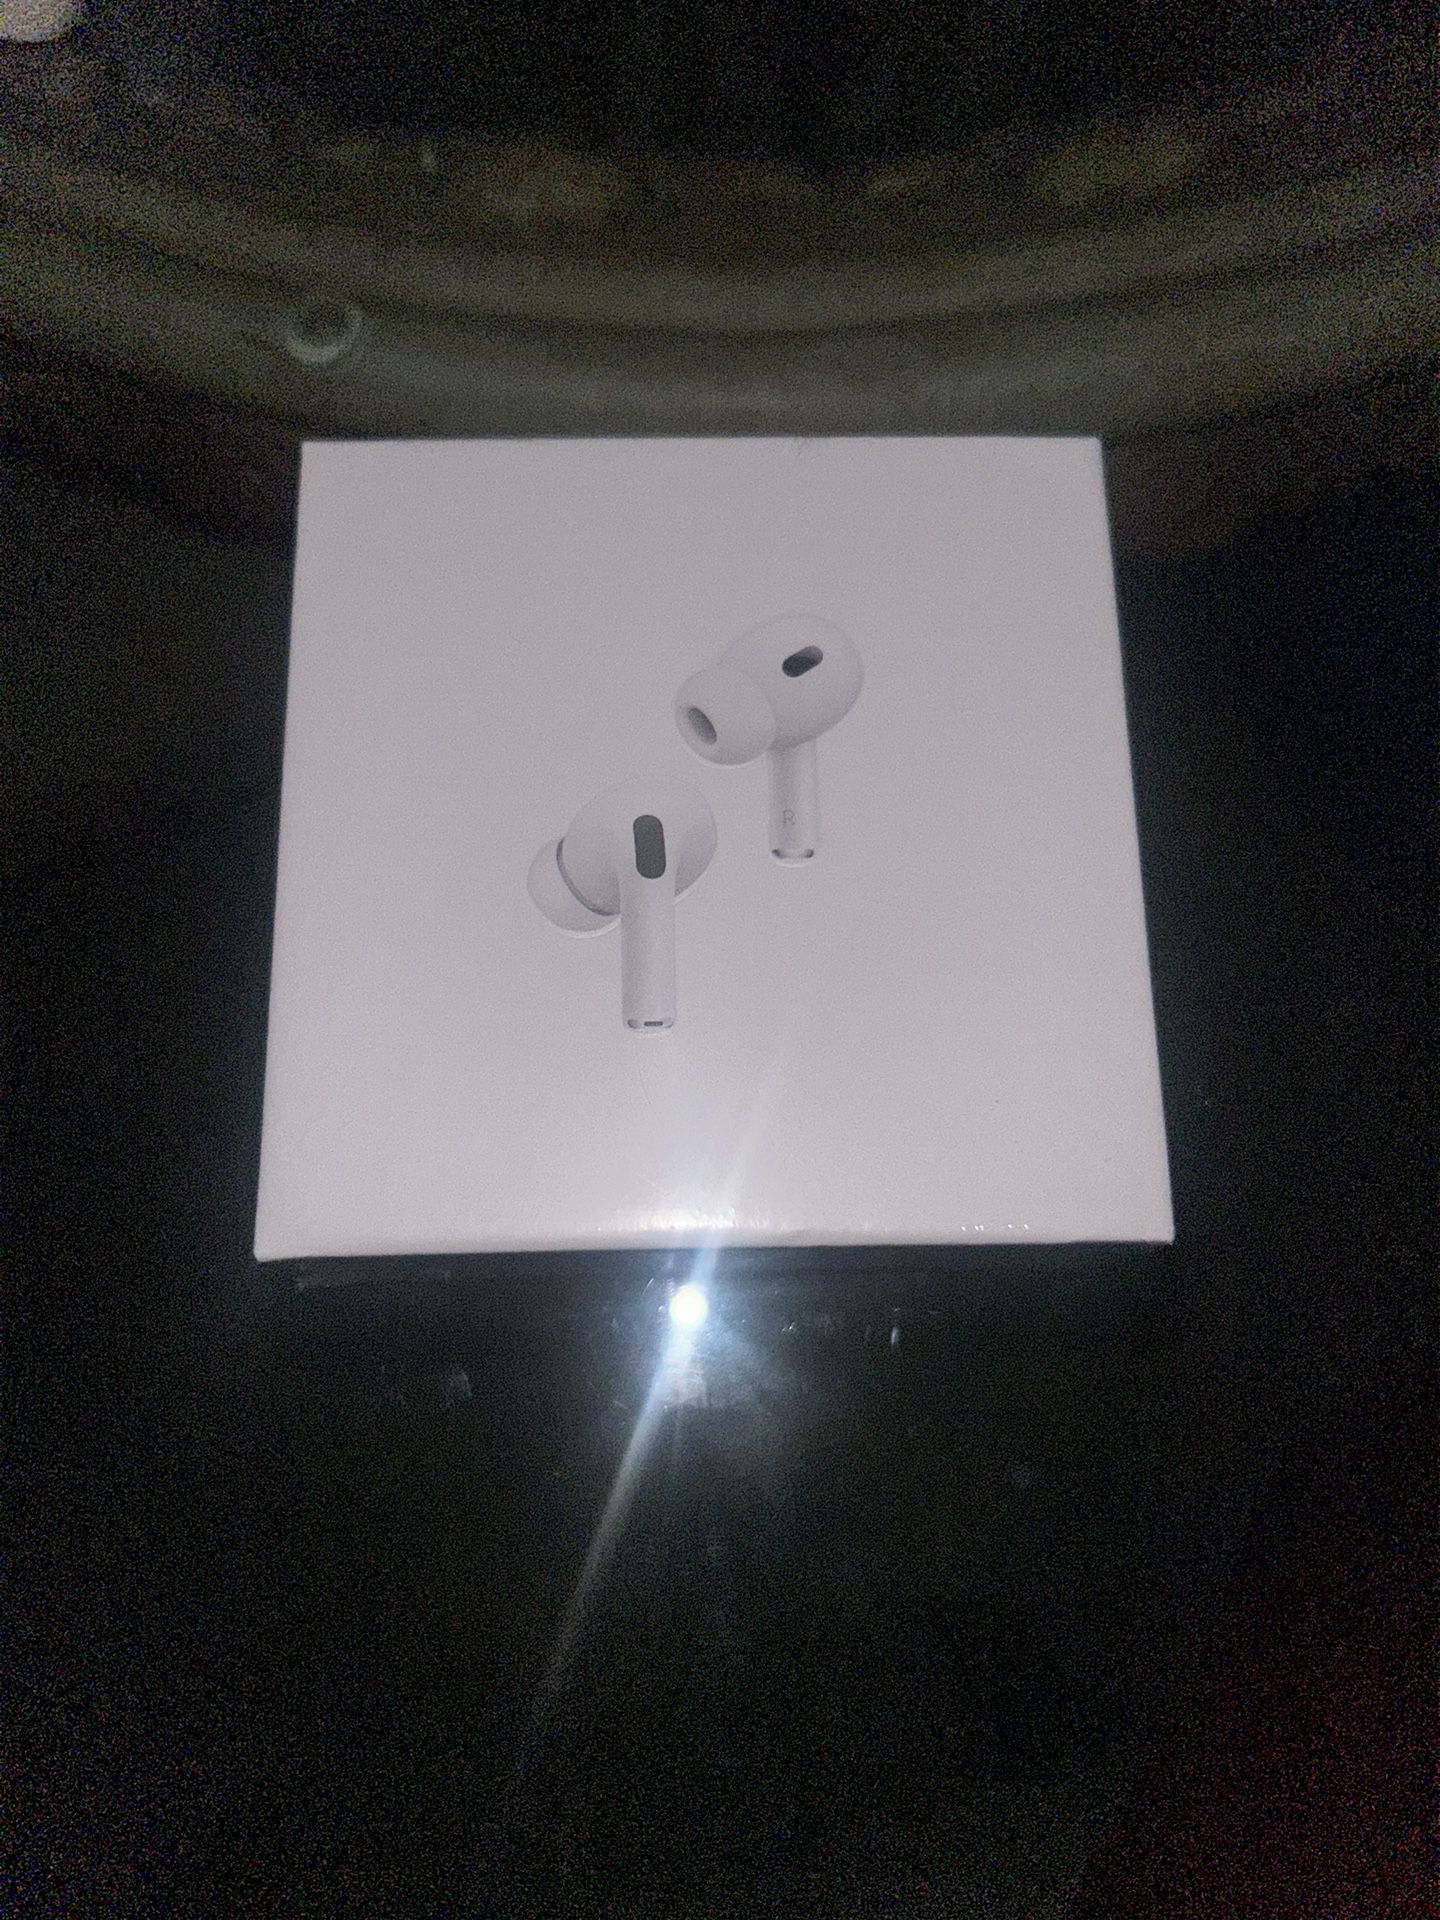 Airpods pros brand new and sealed